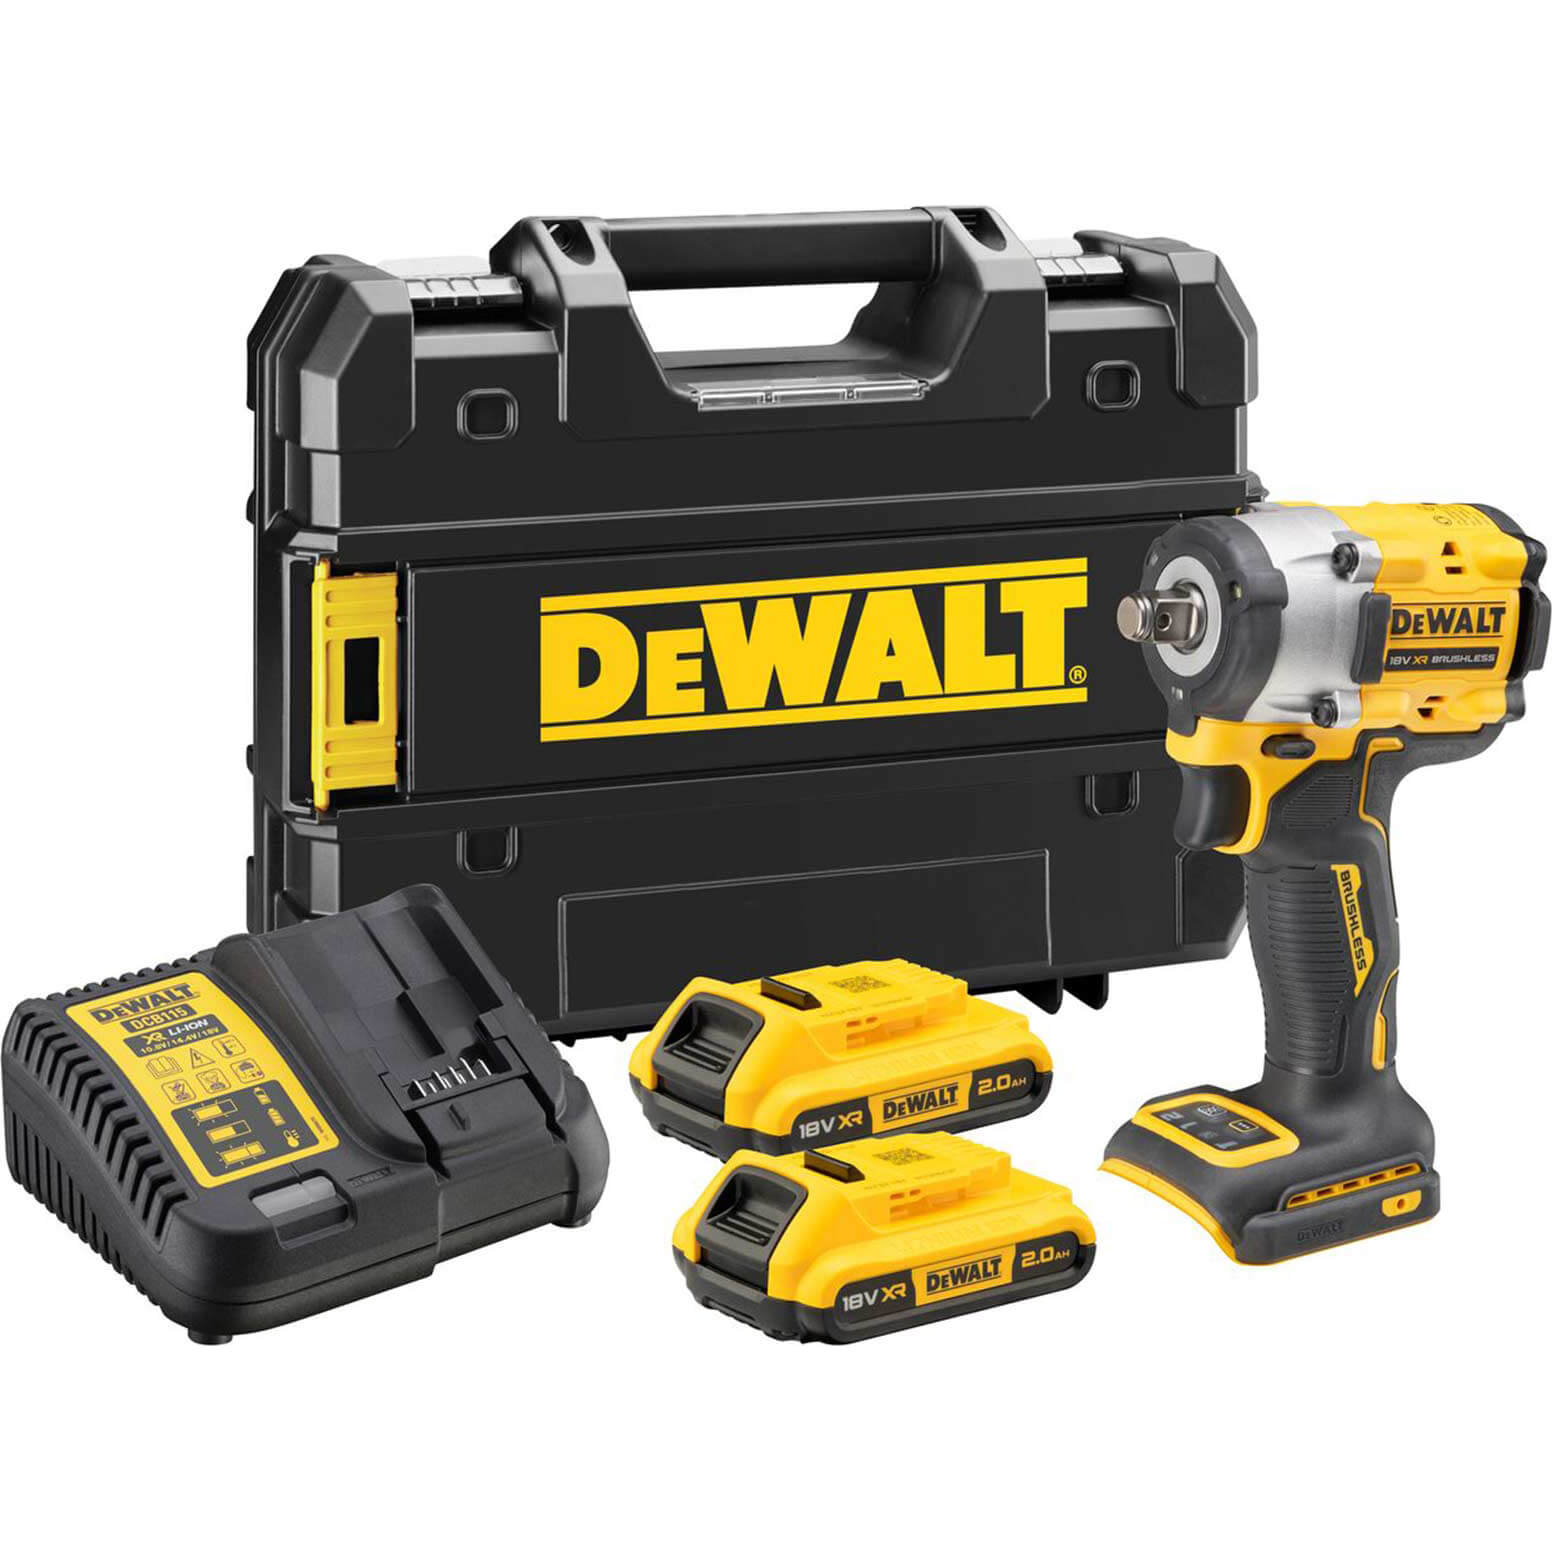 DeWalt DCF921 18v XR Cordless Brushless 1/2" Compact Impact Wrench 2 x 2ah Li-ion Charger Case